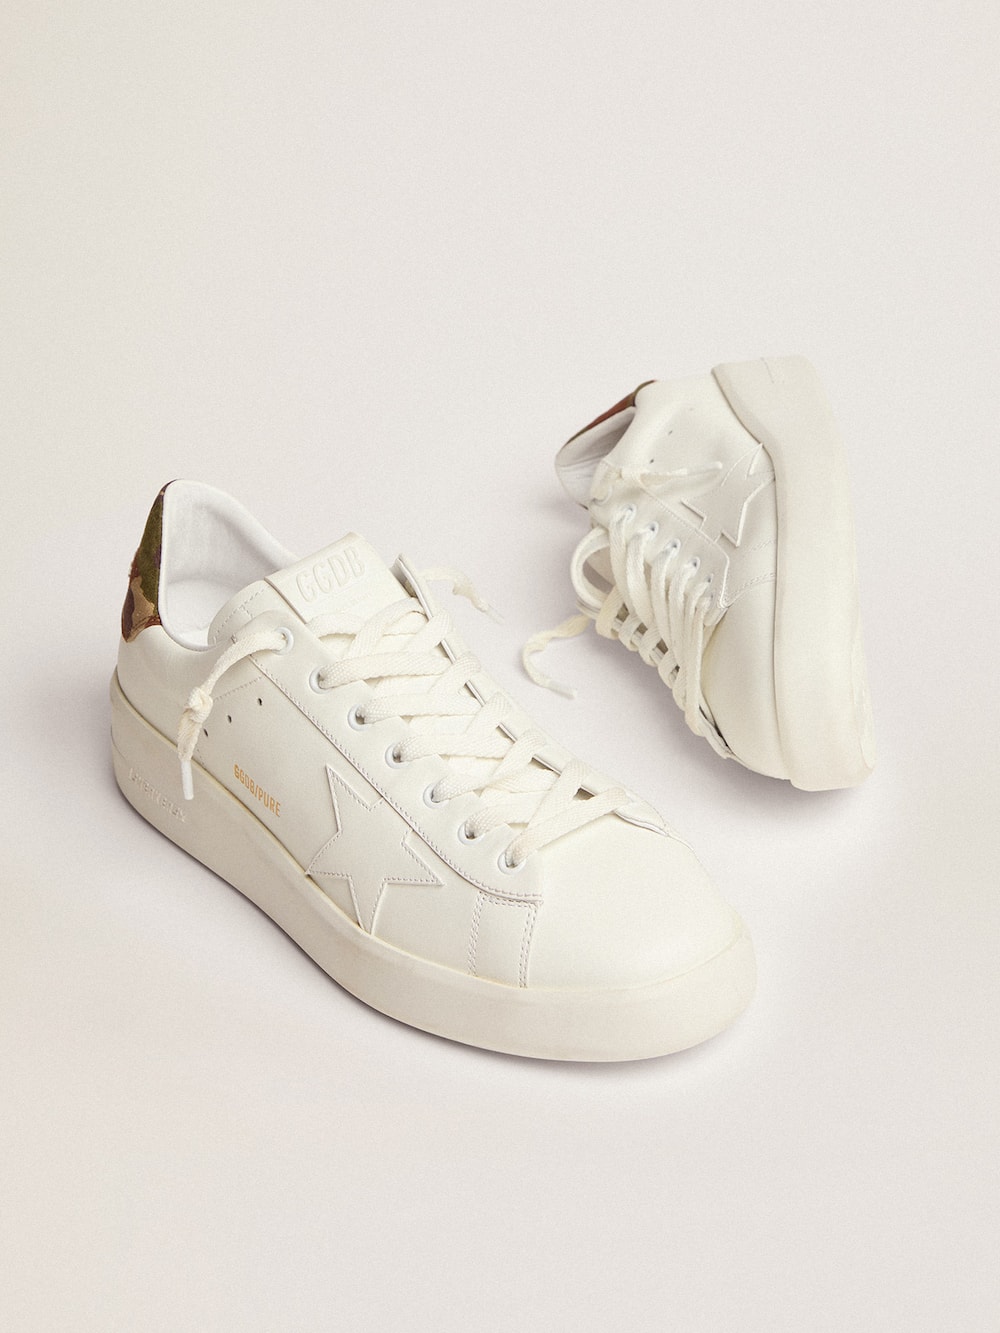 Golden Goose - Men's Purestar in white leather with tone-on-tone star in 